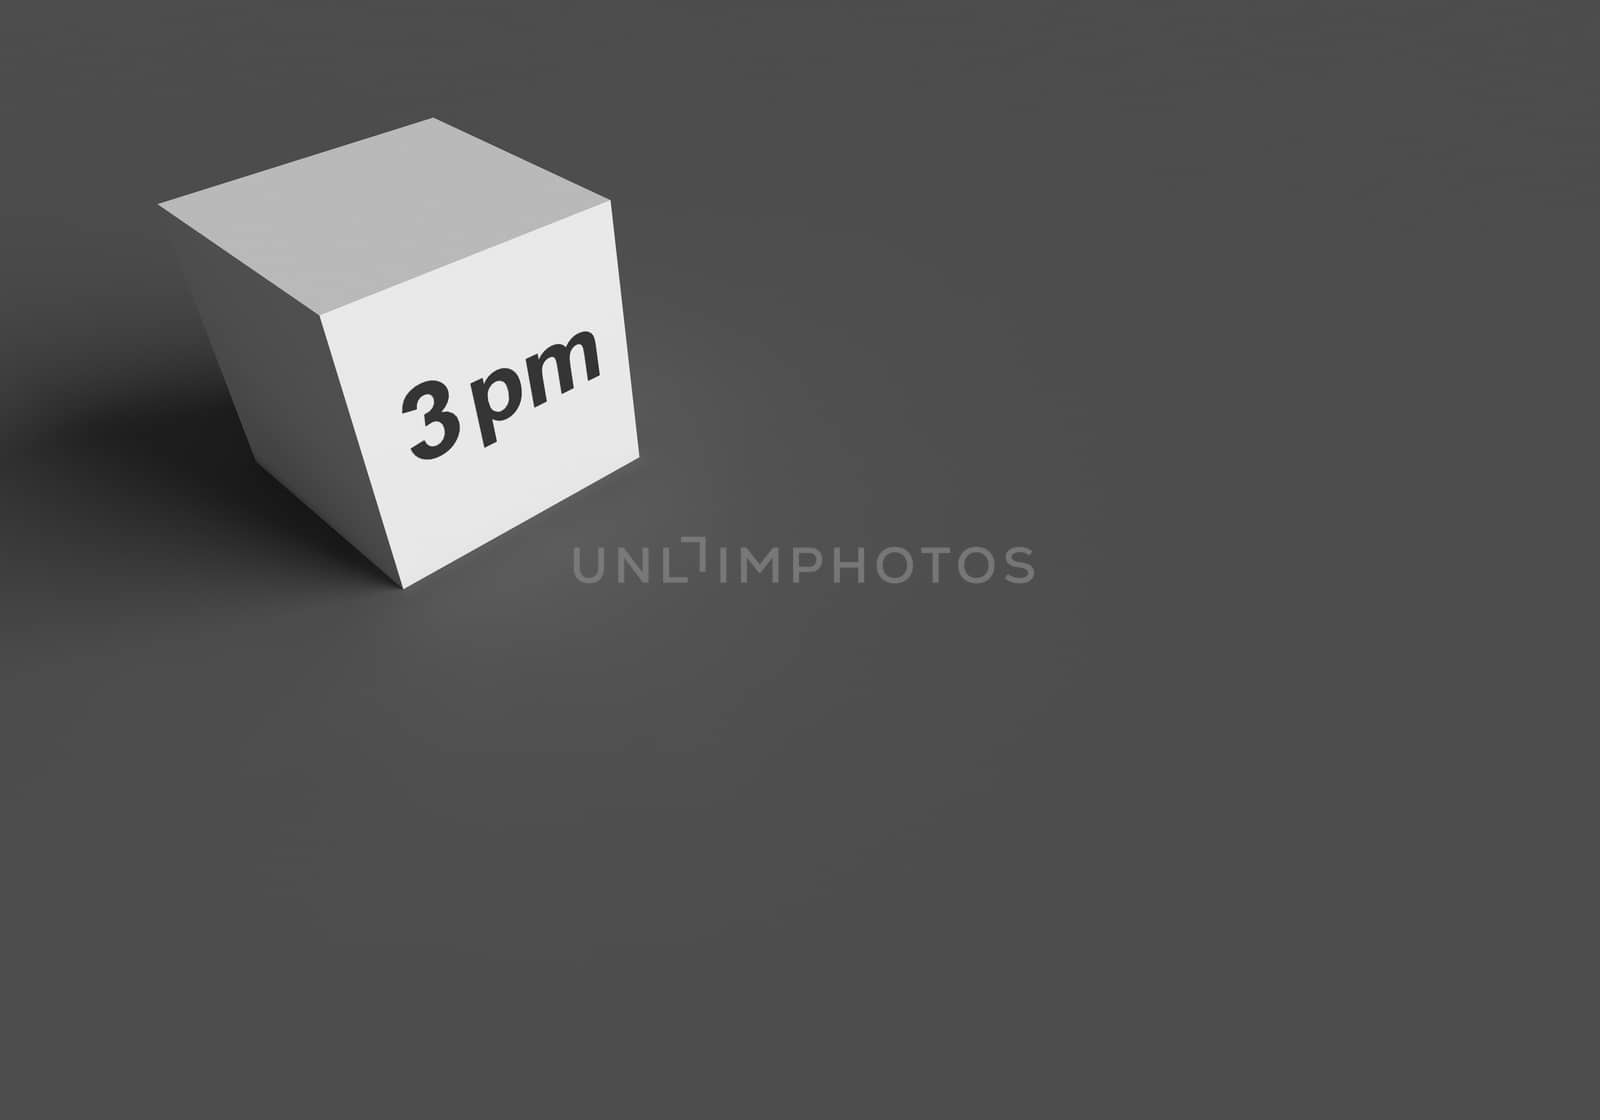 3D RENDERING WORDS 3 pm ON WHITE CUBE by PrettyTG